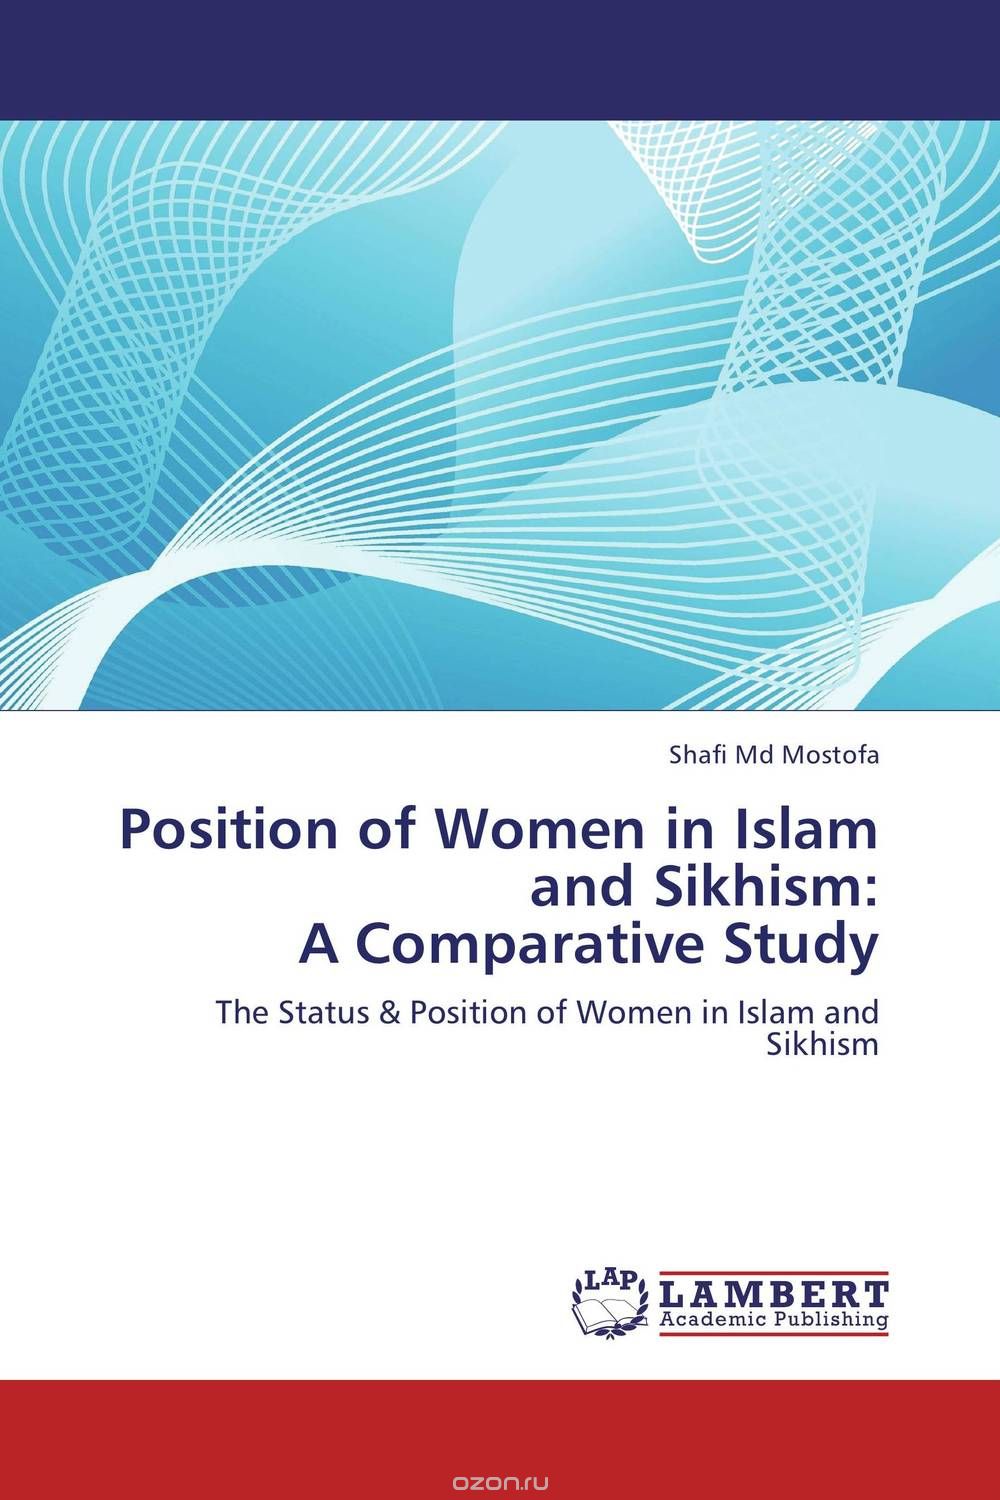 Скачать книгу "Position of Women in Islam and Sikhism:  A Comparative Study"